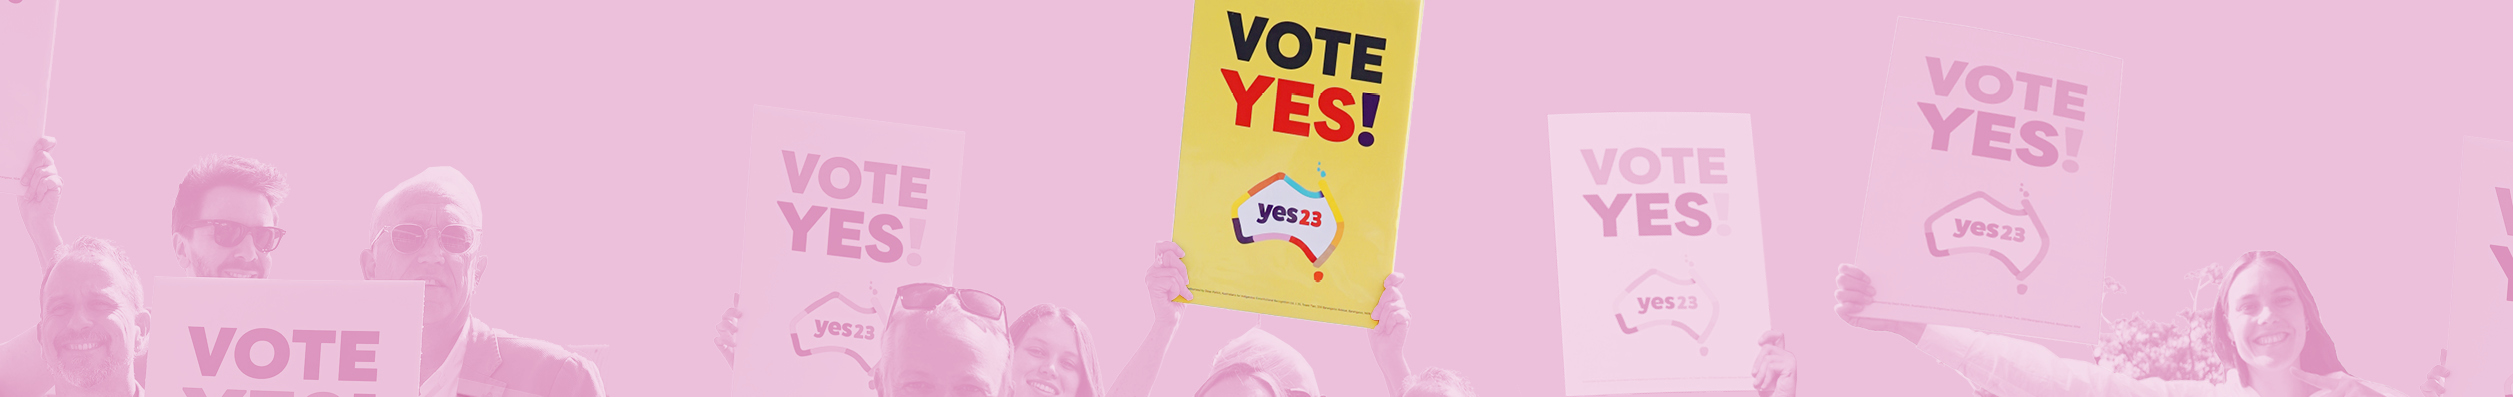 A pink tinted regtangualr banner showing a group of people's heads holding Yes banners. A bright yellow banner in the centre reads Yes 23 in red letters.